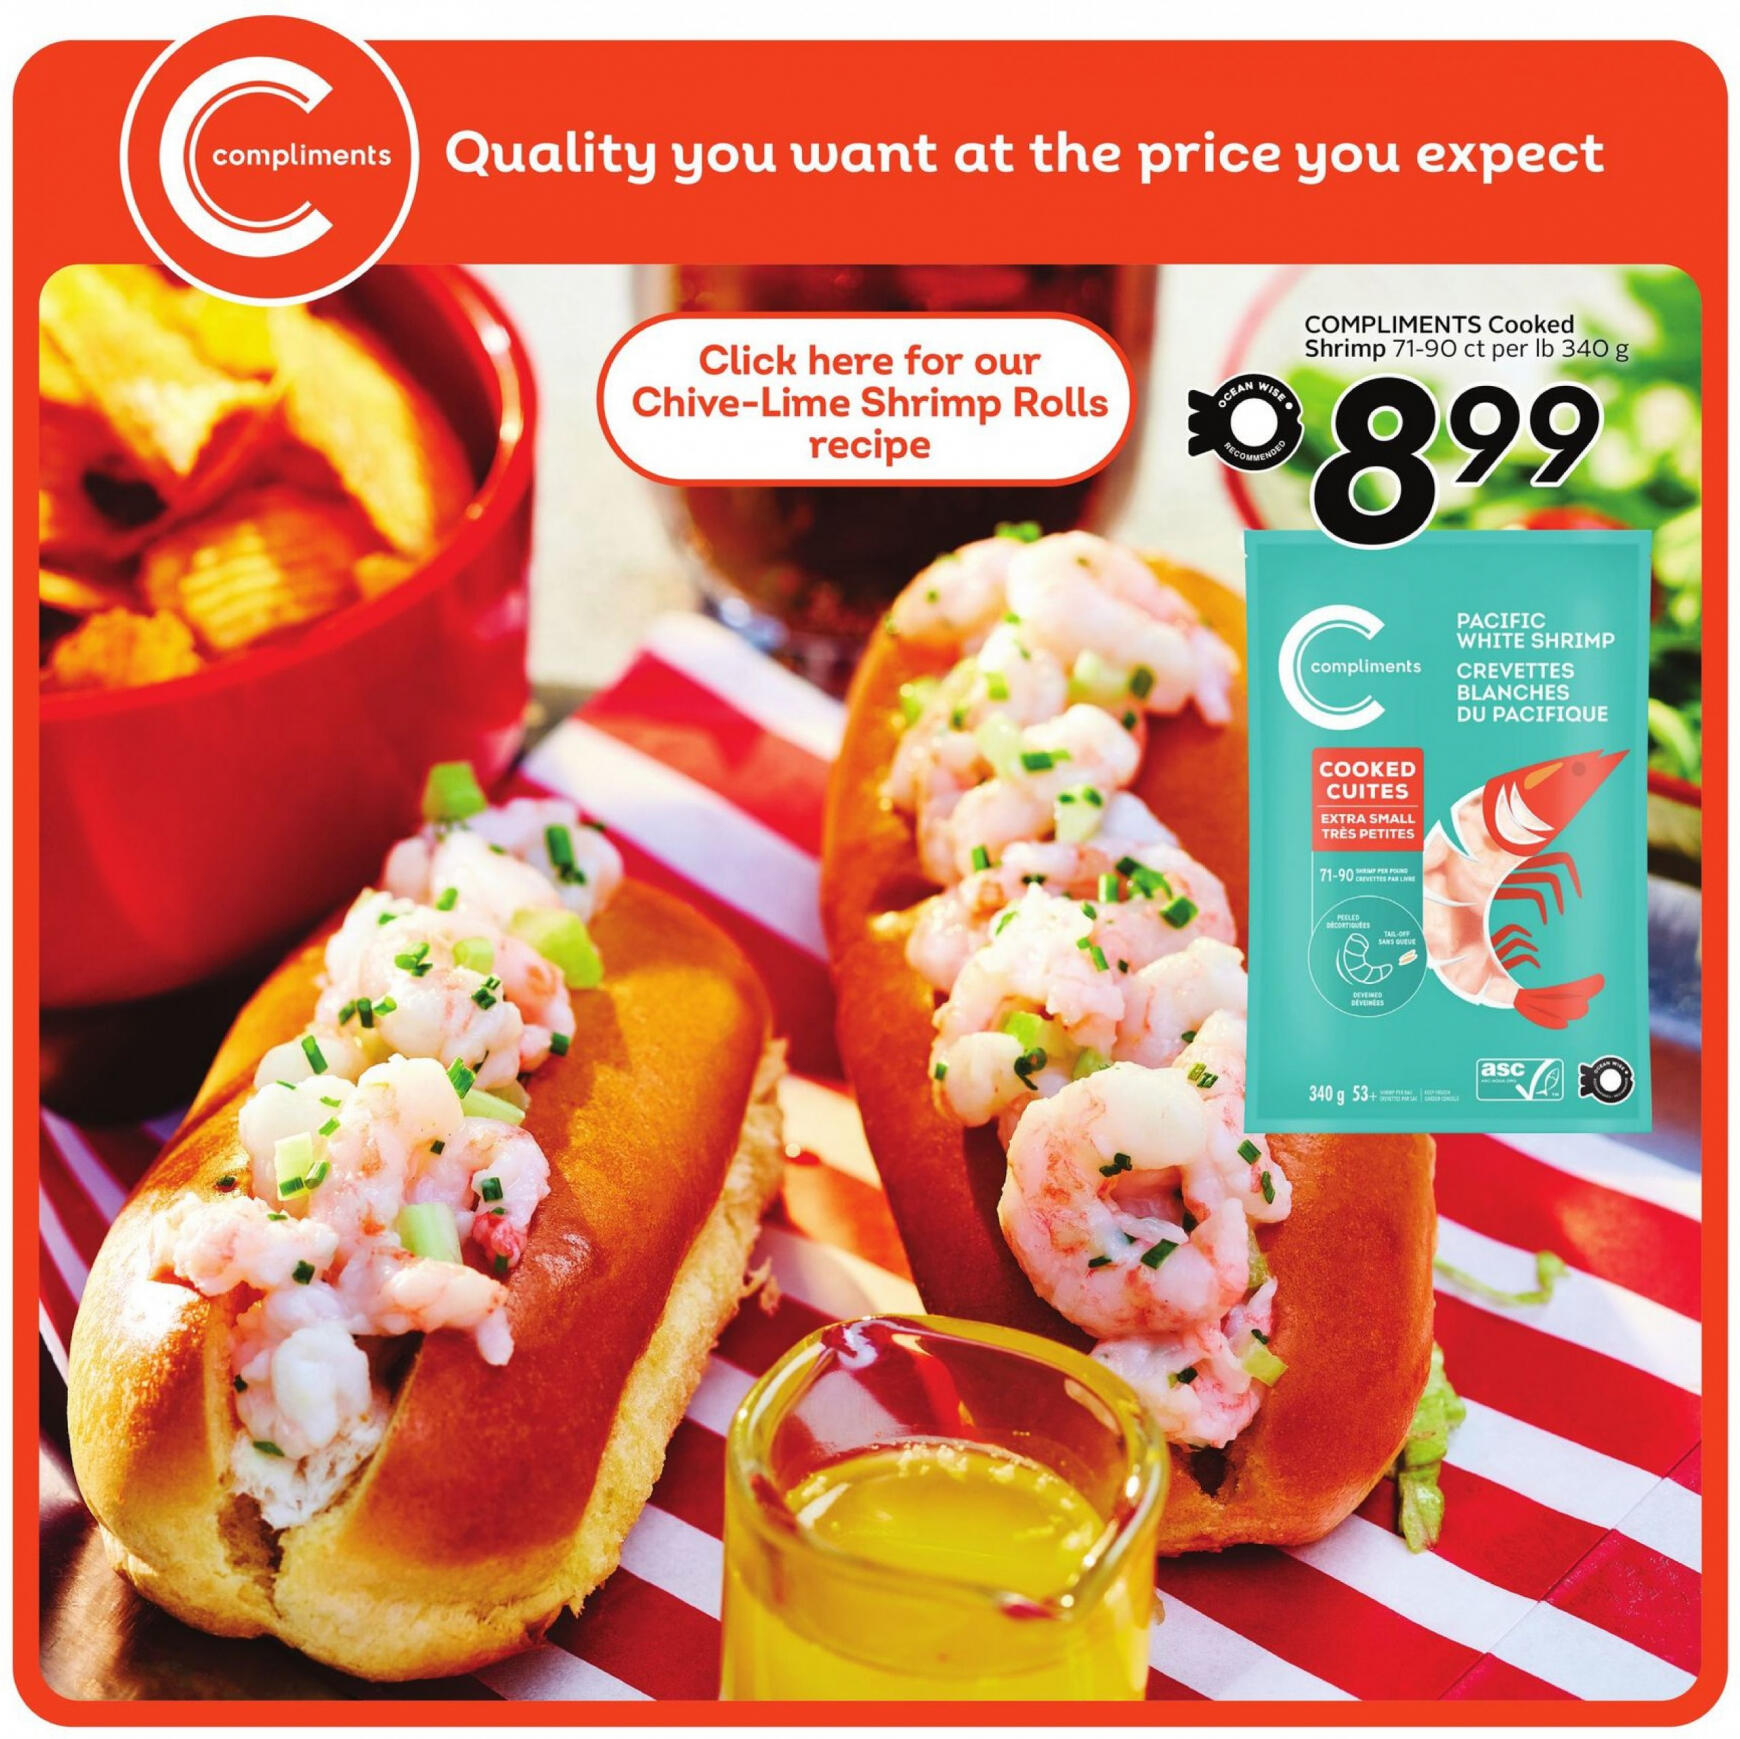 sobeys - Sobeys - Weekly Flyer - Ontario flyer current 23.05. - 29.05. - page: 11